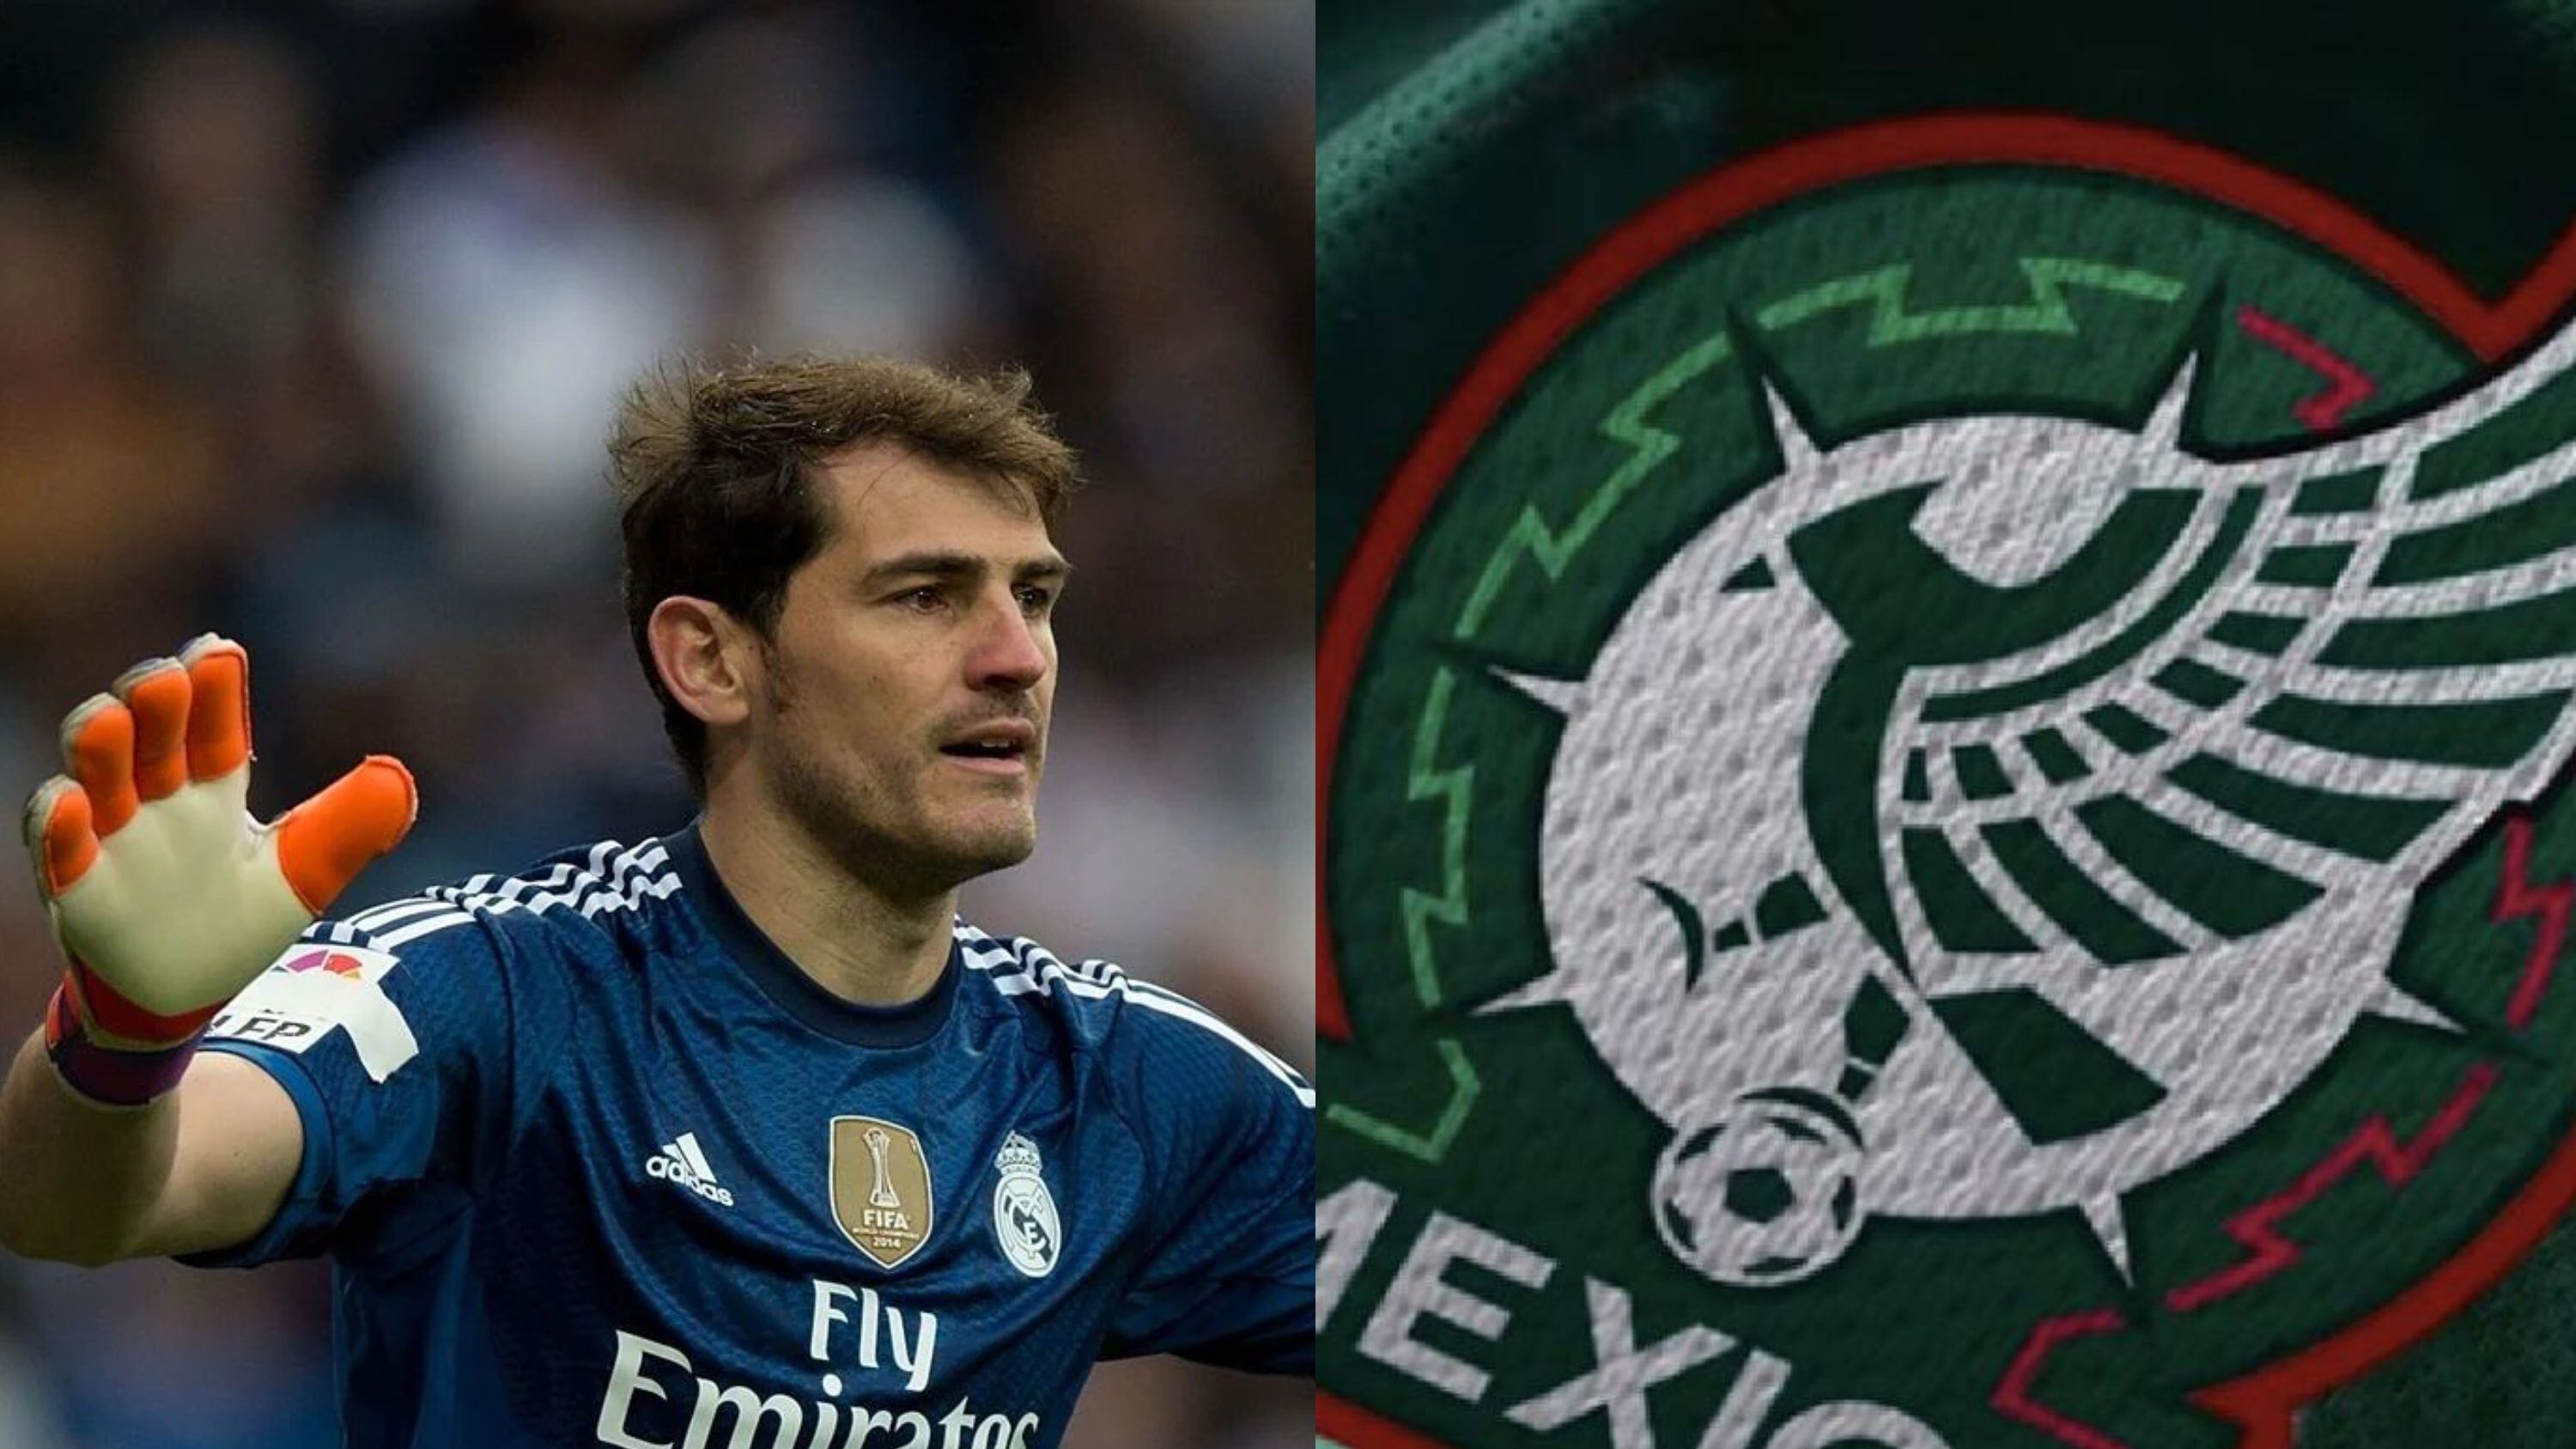 The best Mexican goalkeeper, according to Iker Casillas, is neither Ochoa nor Jorge Campos